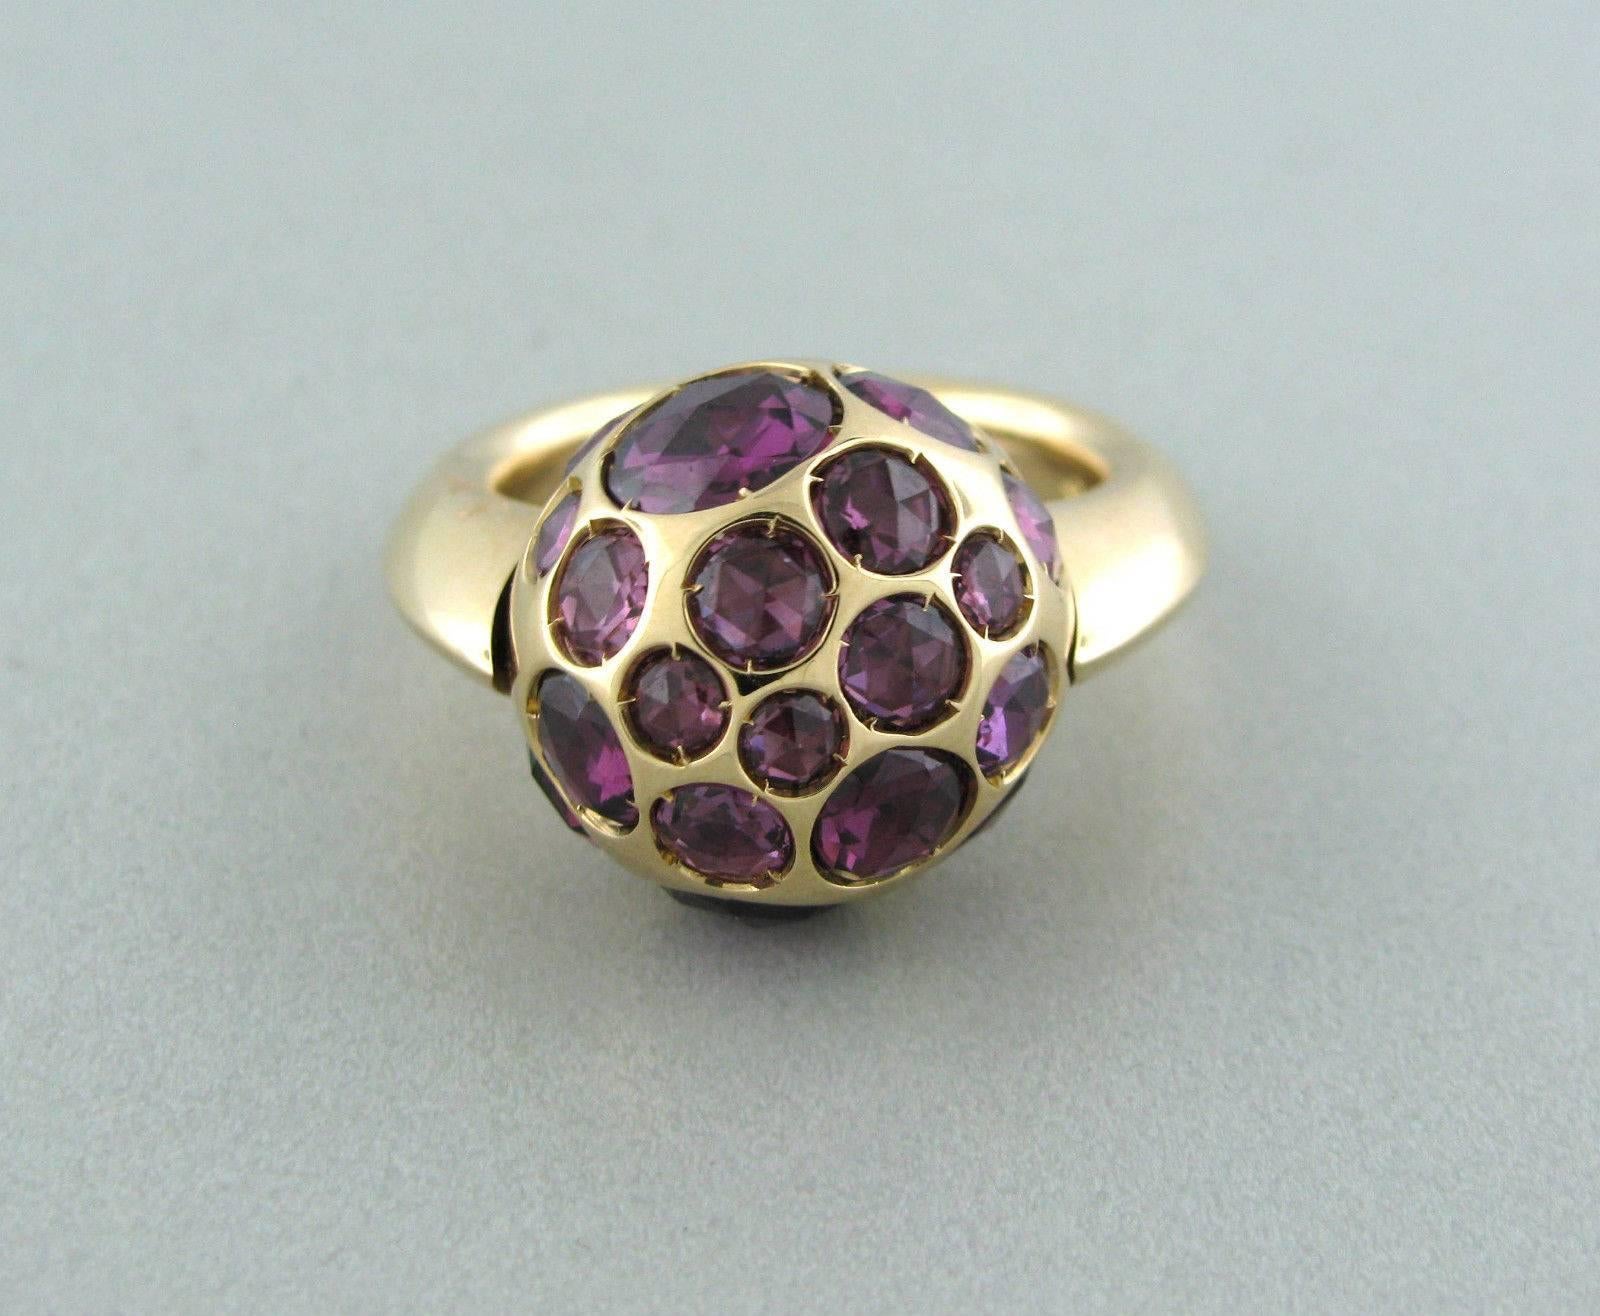 Pomellato 18k gold ring crafted for the Harem collection. Features rhodolite and garnet. Ring top measures 17mm in diameter. Marked 750, Pomellato. Weight-19.8 grams. Ring size 6.5. Ring retails for $7170.